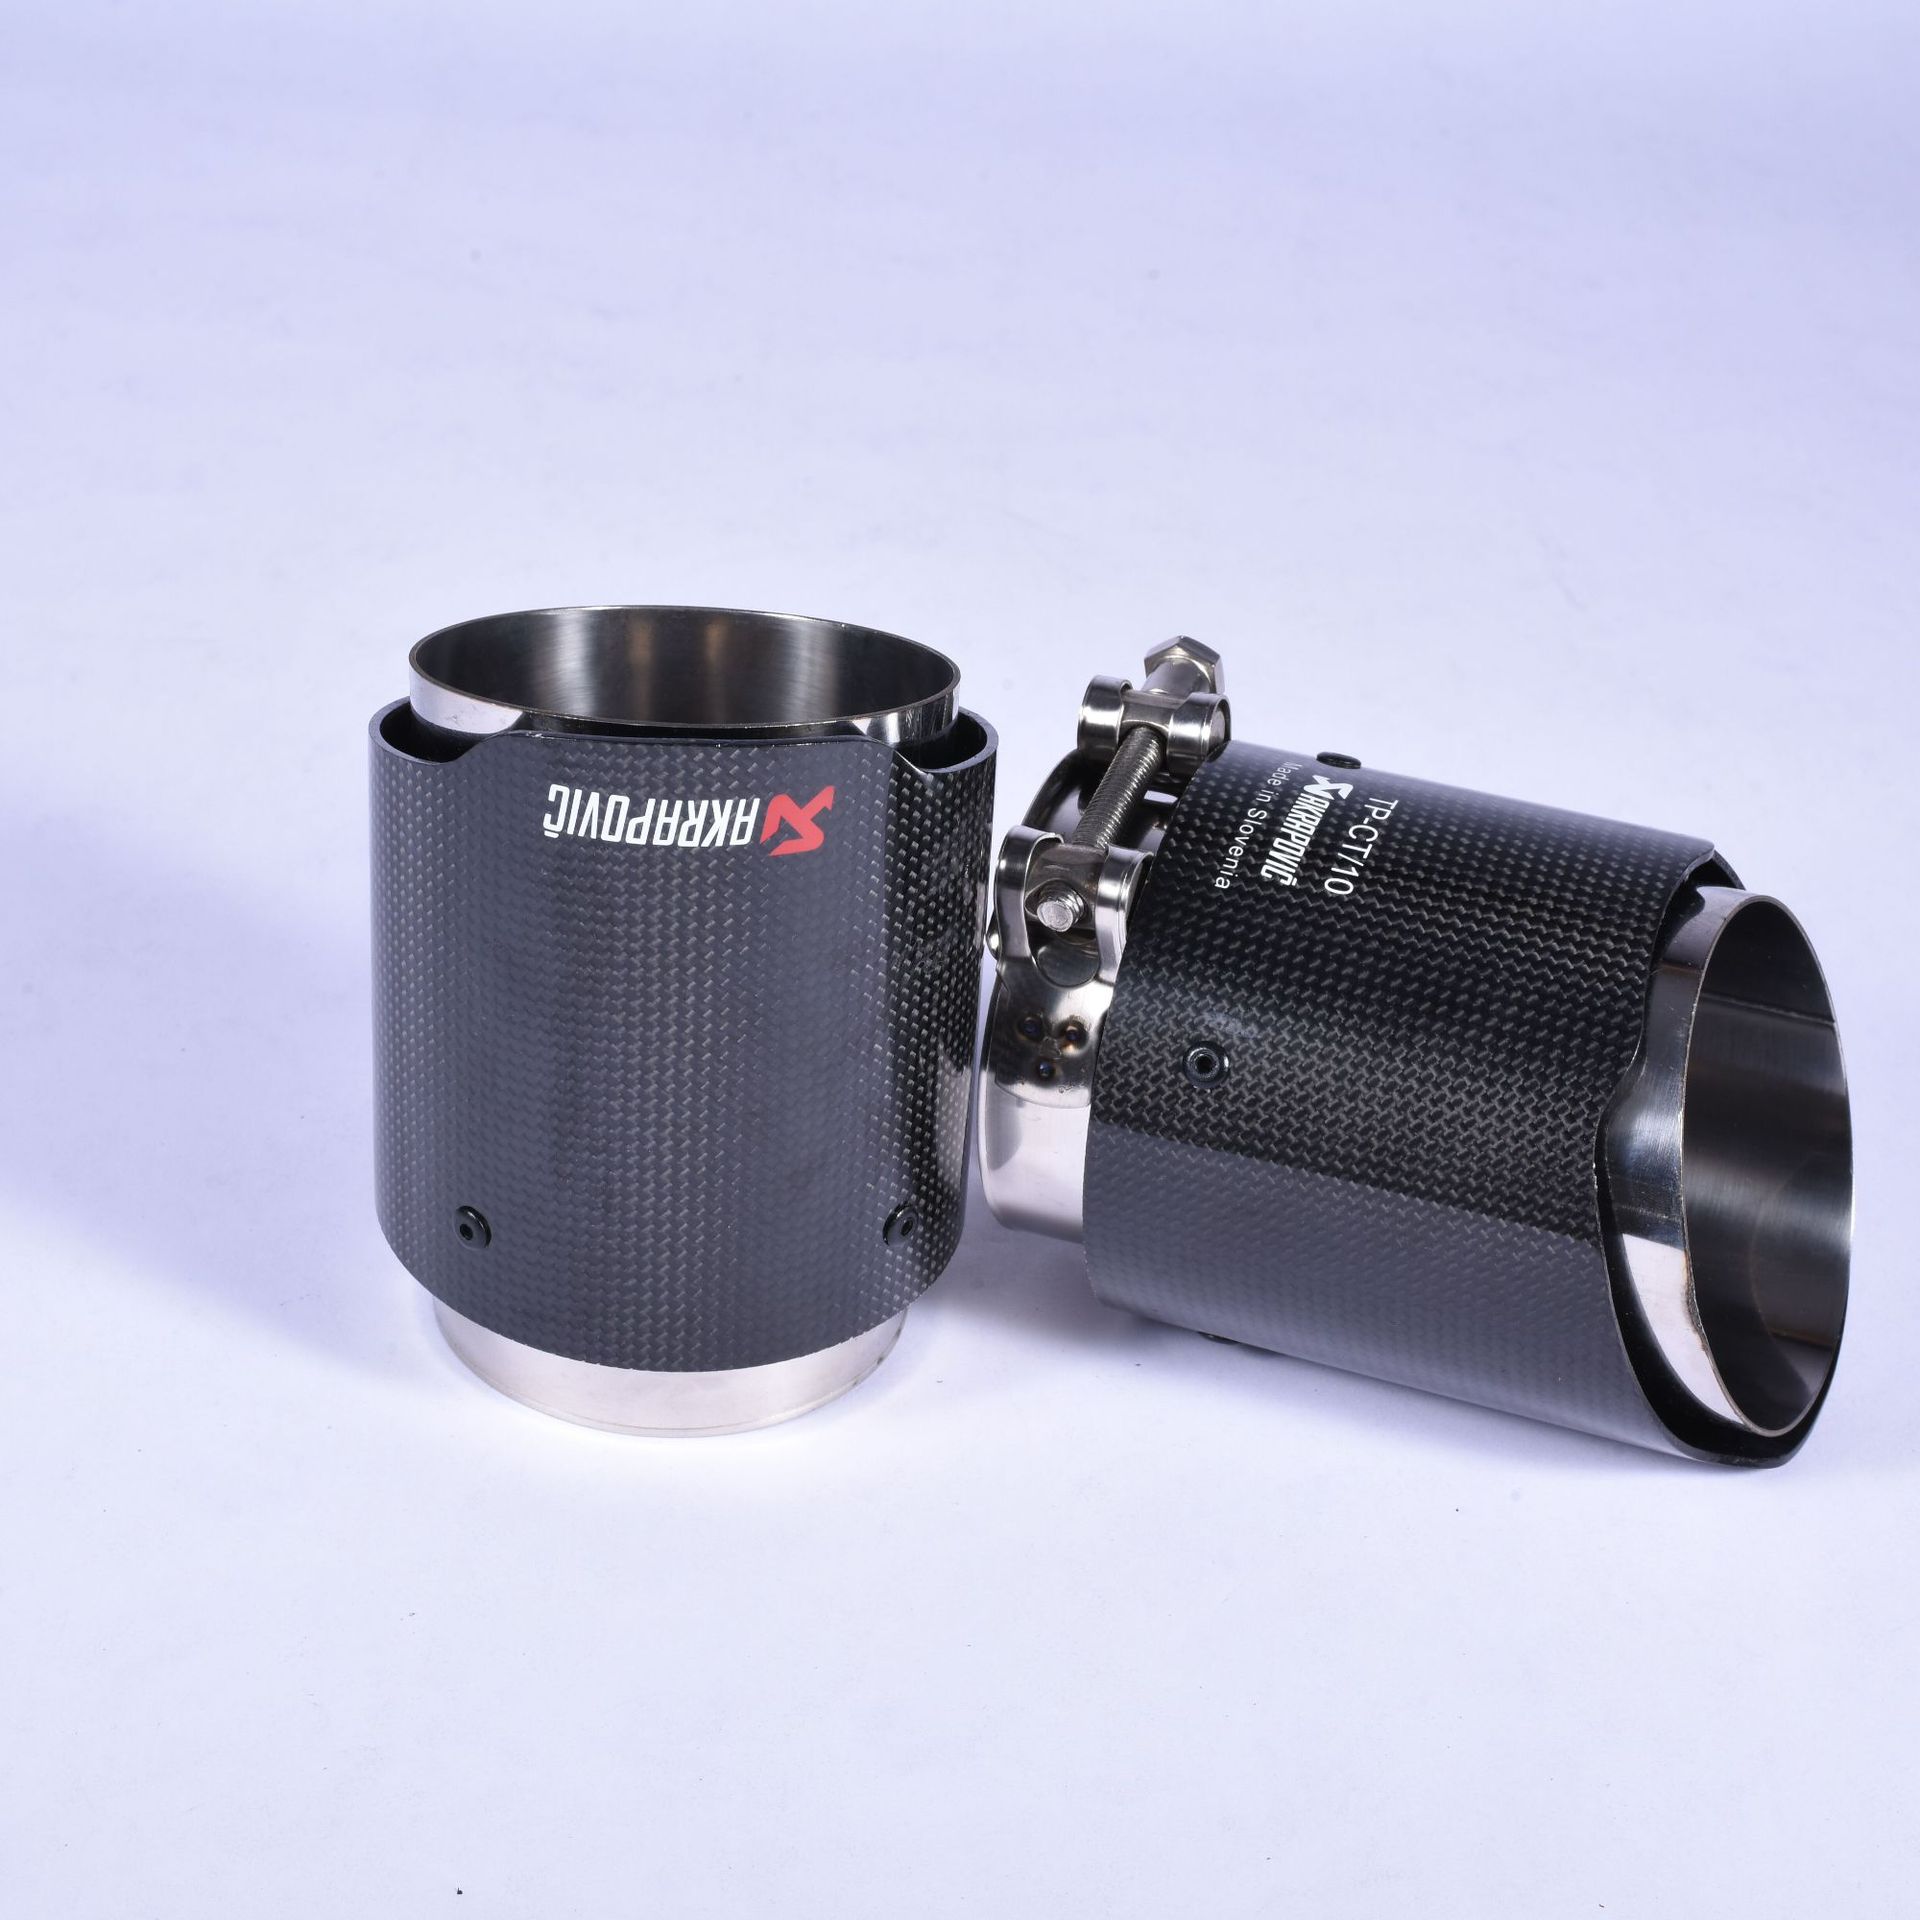 Single Inlet and Outlet Universal Carbon Fiber Exhaust Muffler Tip